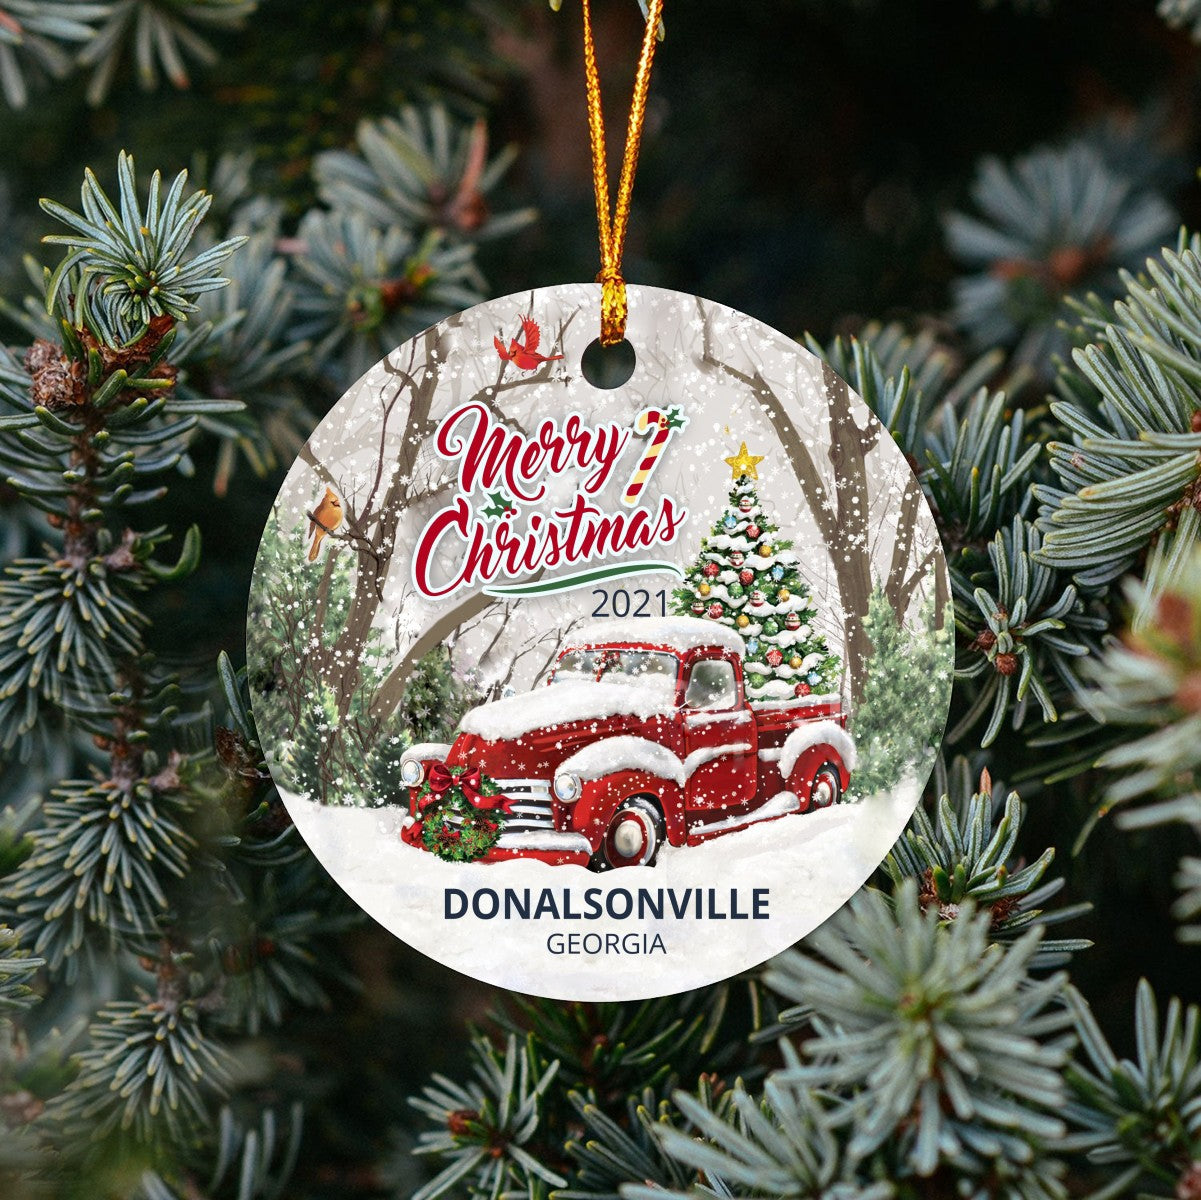 Christmas Tree Ornaments Donalsonville - Ornament With Name City, State Donalsonville Georgia GA Ornament - Red Truck Xmas Ornaments 3'' Plastic Gift For Family, Friend And Housewarming